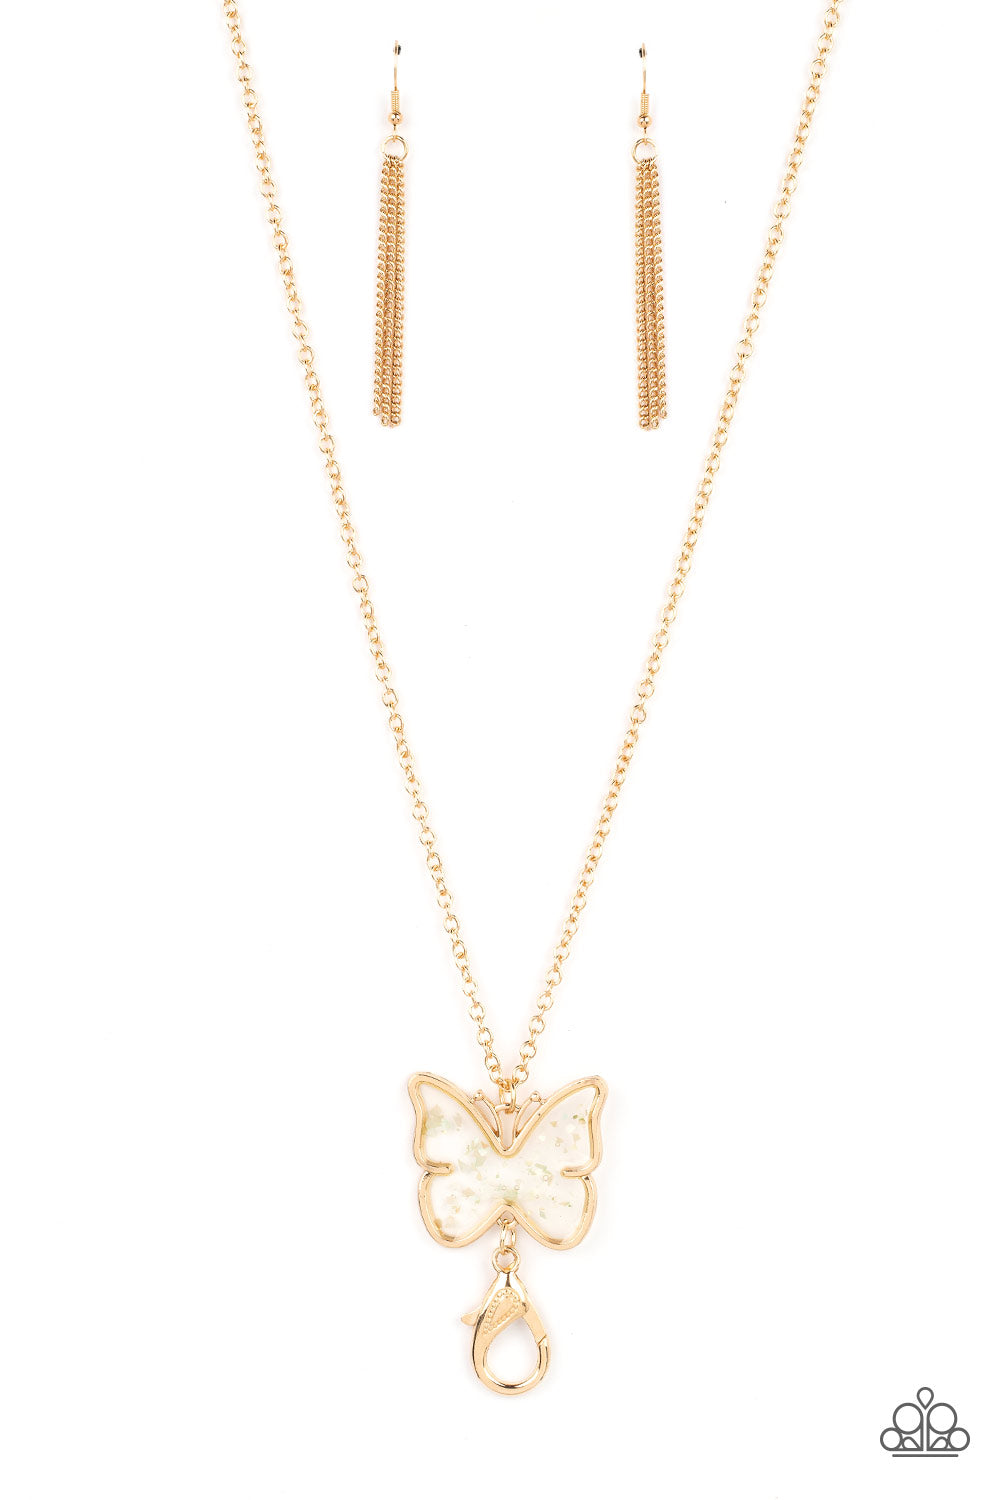 Gives Me Butterflies Gold Necklace